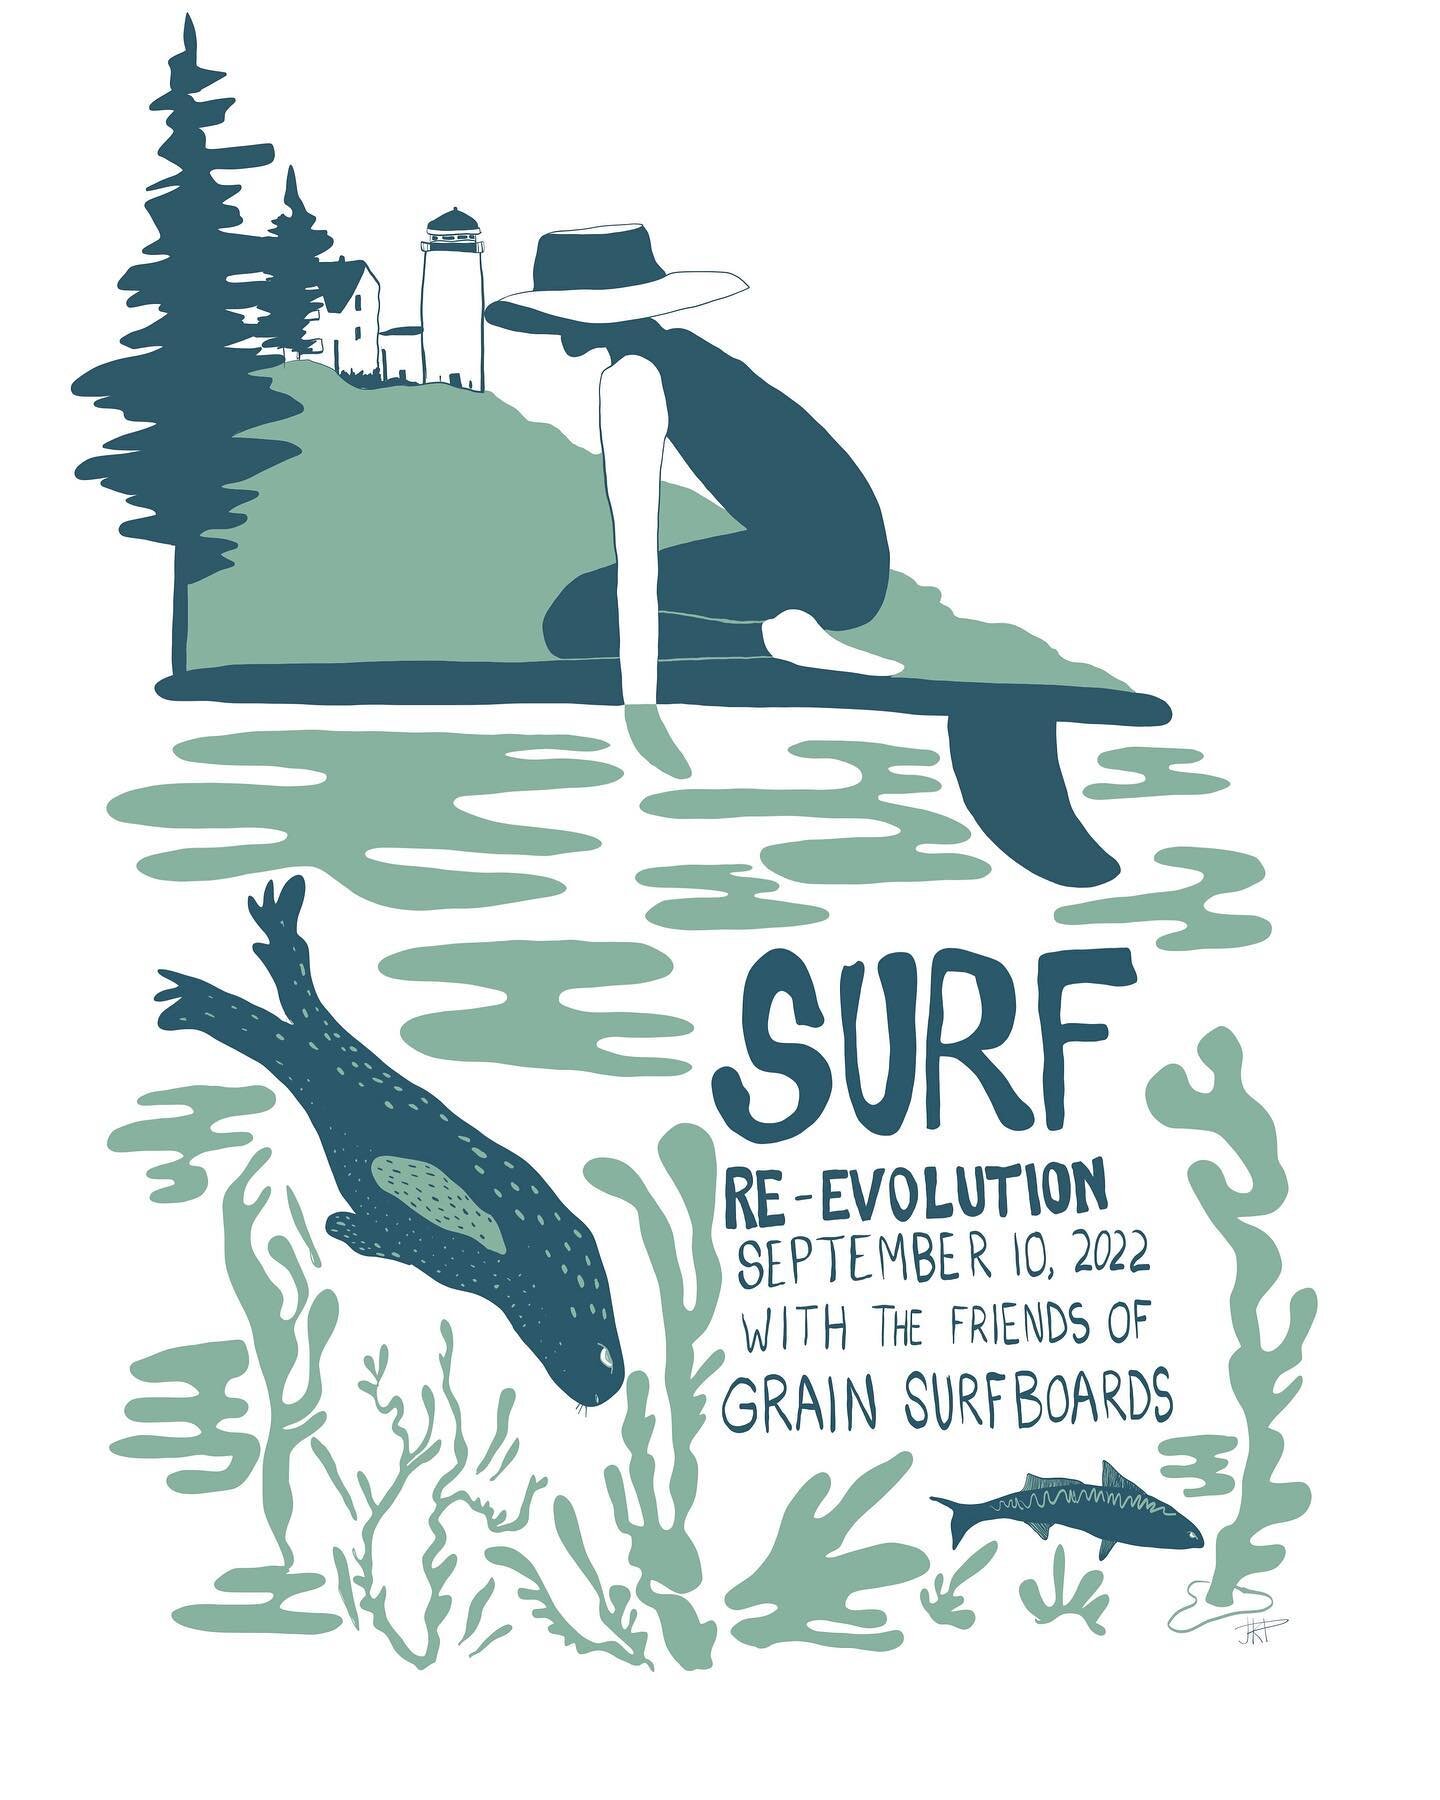 Two versions of an event flyer for @grainsurfboards Surf Re-Evolution in a couple of weeks! There will be live printing of the single color version (second slide) at the event, or you can order a shirt through Grain! I&rsquo;ll have some work for sal